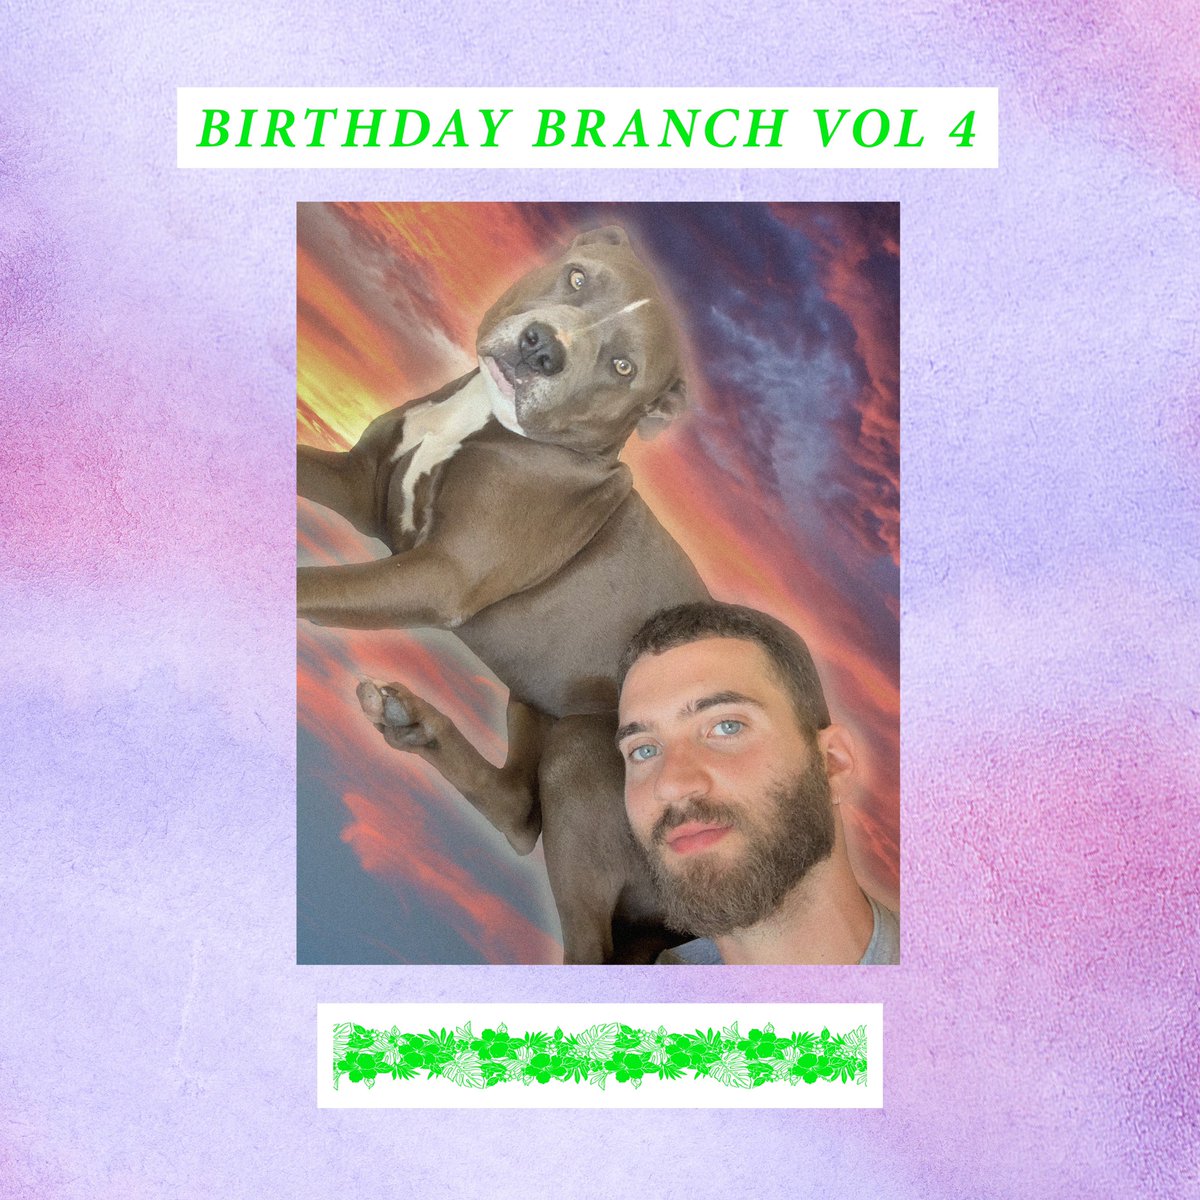 Another year wiser 🙏🏼 another Birthday Branch to crank up 🎧 Vol 4 out now 😁 soundcloud.app.goo.gl/ispQ7s8QUdsgz3…